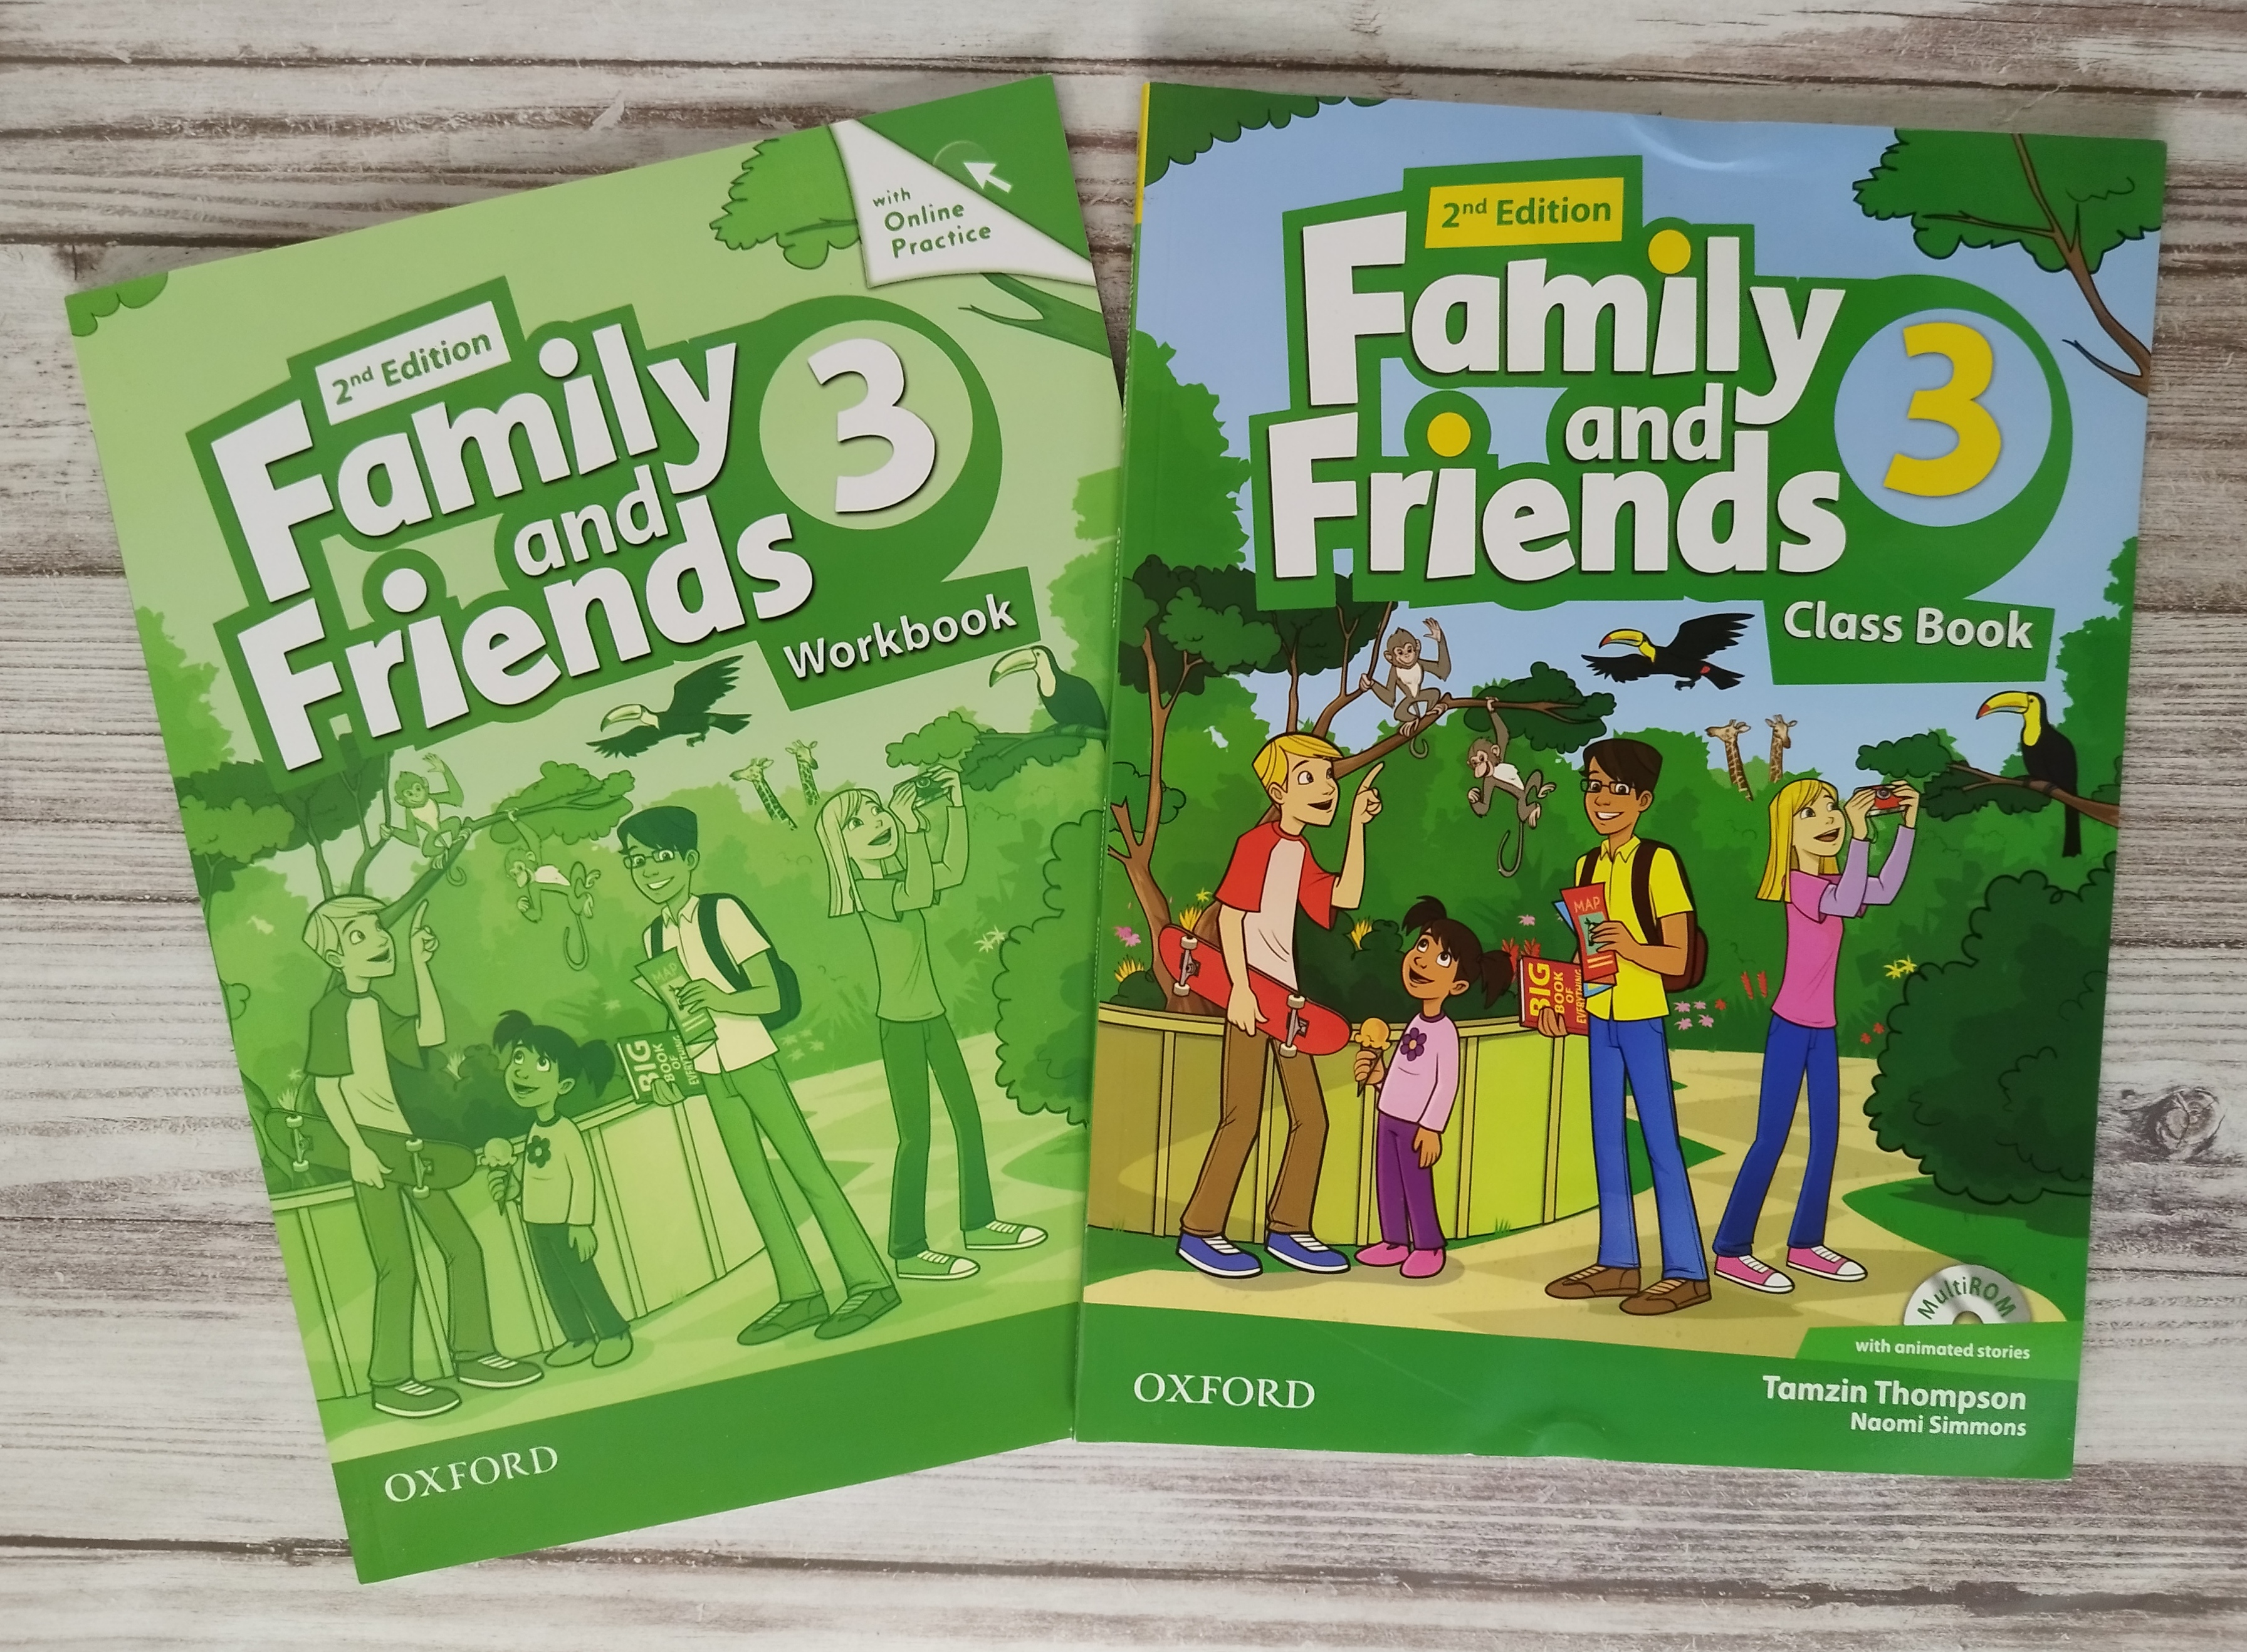 Фэмили энд френдс 3 рабочая. Family and friends 3 2nd Edition. Family and friends 3 homebook. Family and friends 1 2nd Edition clothes Cube. Фэмили энд френдс 3 учебник стр 79.